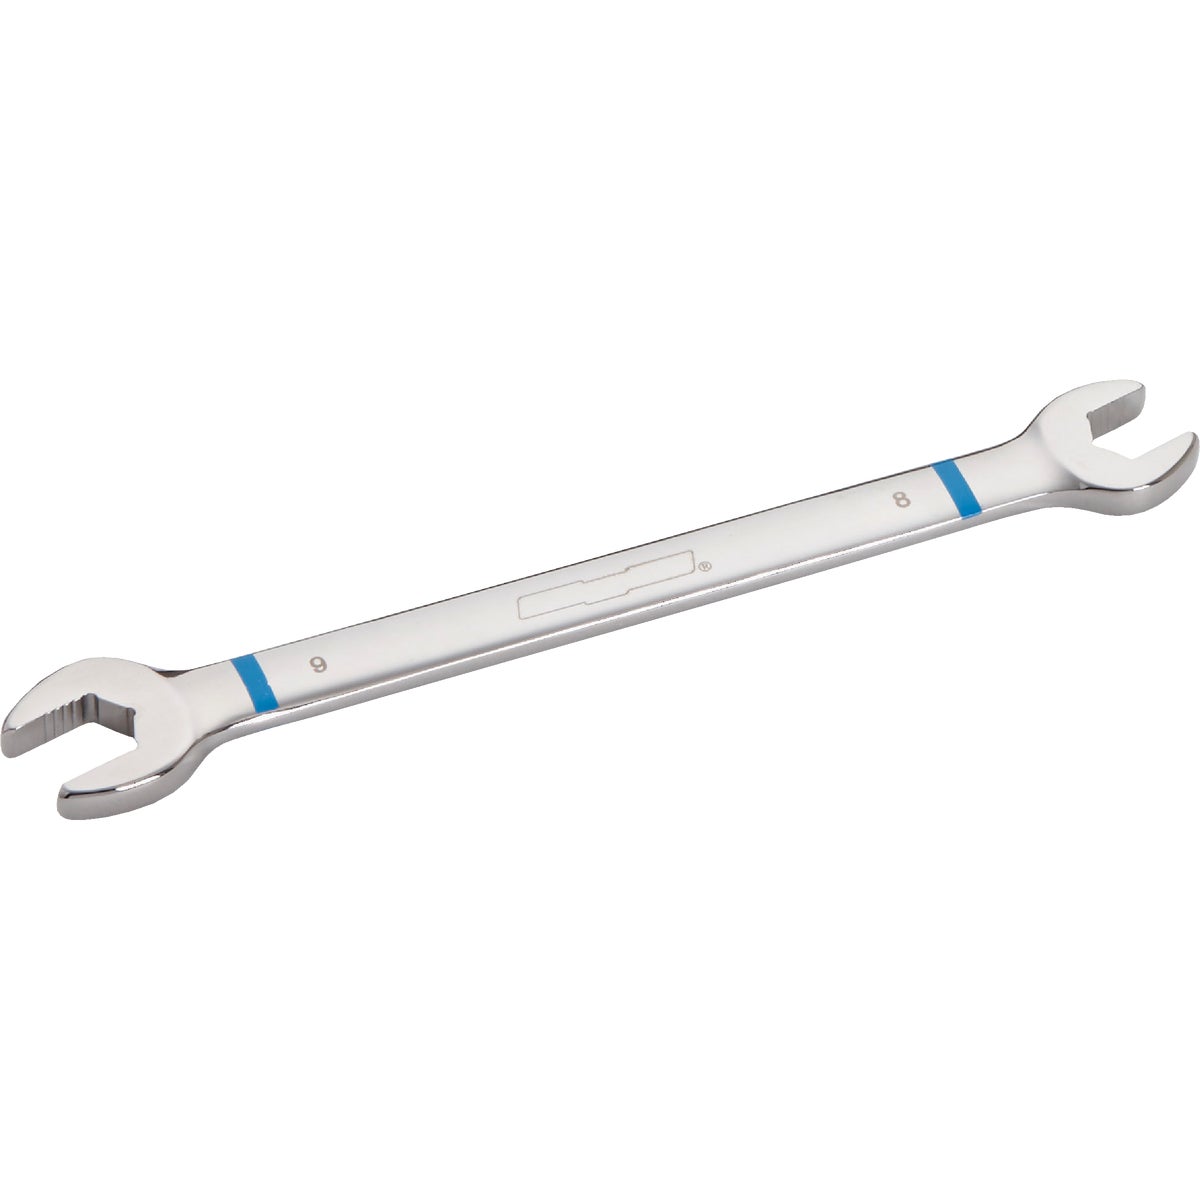 Channellock Metric 8 mm x 9 mm Open End Wrench